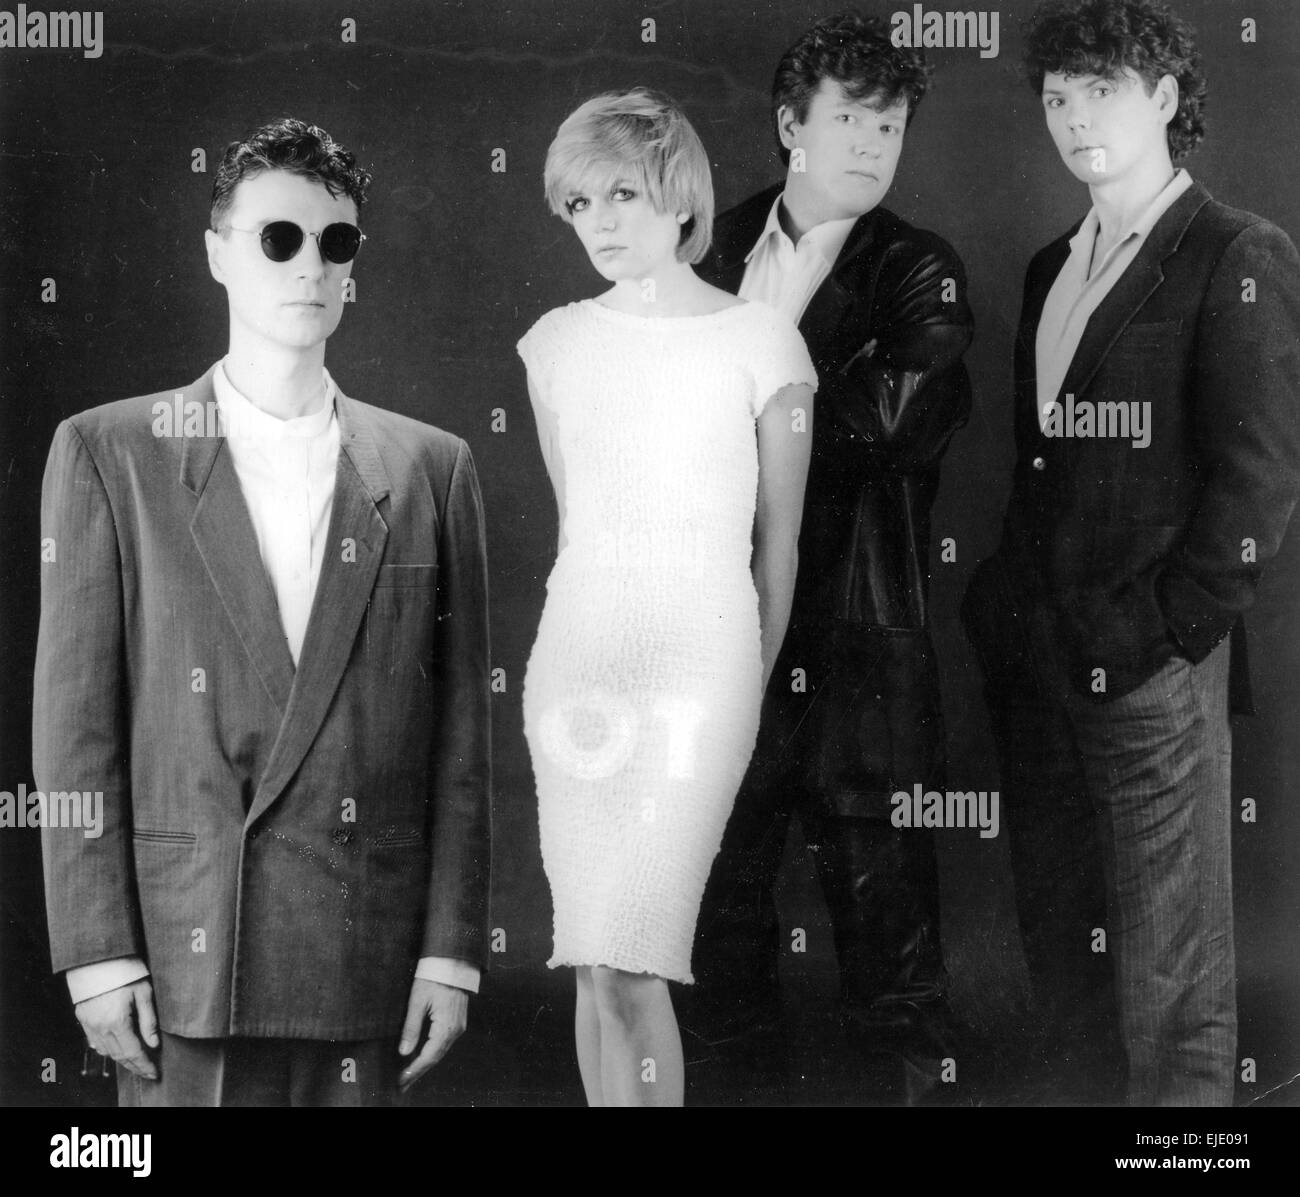 TALKING HEADS Promotional photo of  US rock group about 1985. From left: David  Tina Weymouth, Chris Frantz, Jerry Harrison Stock Photo